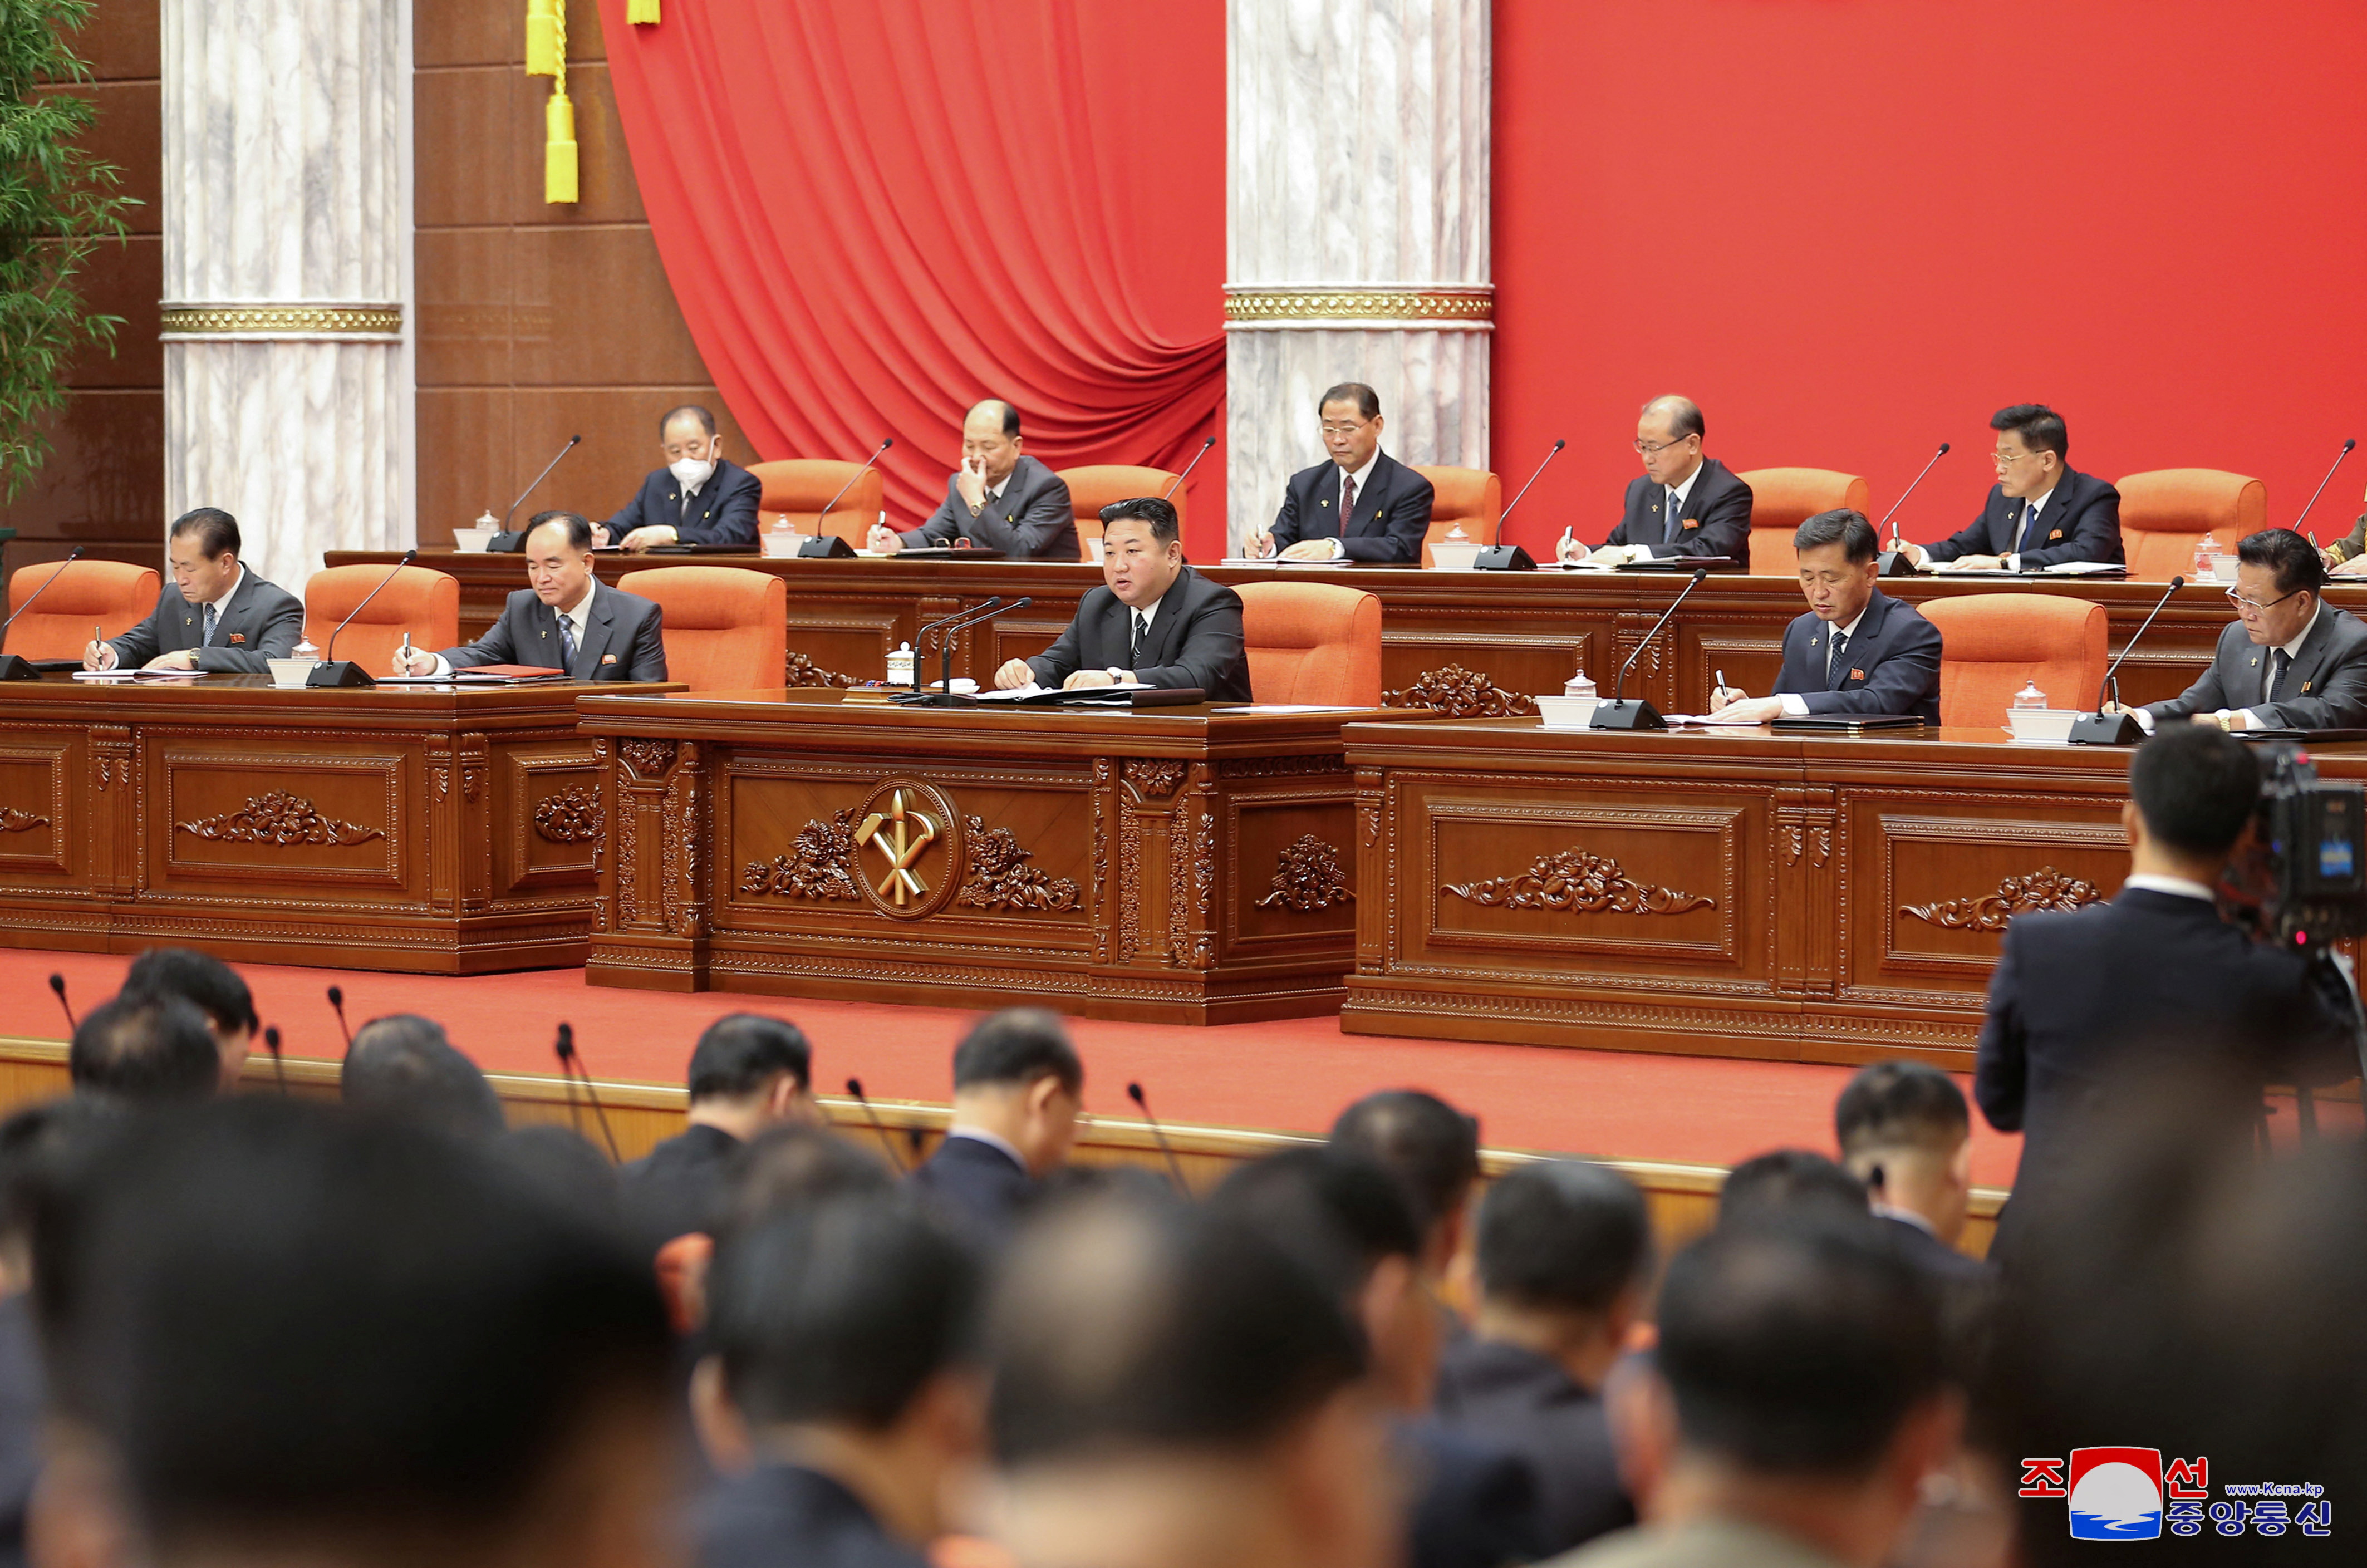 Fifth Enlarged Plenary Meeting of Eighth WPK Central Committee in Pyongyang